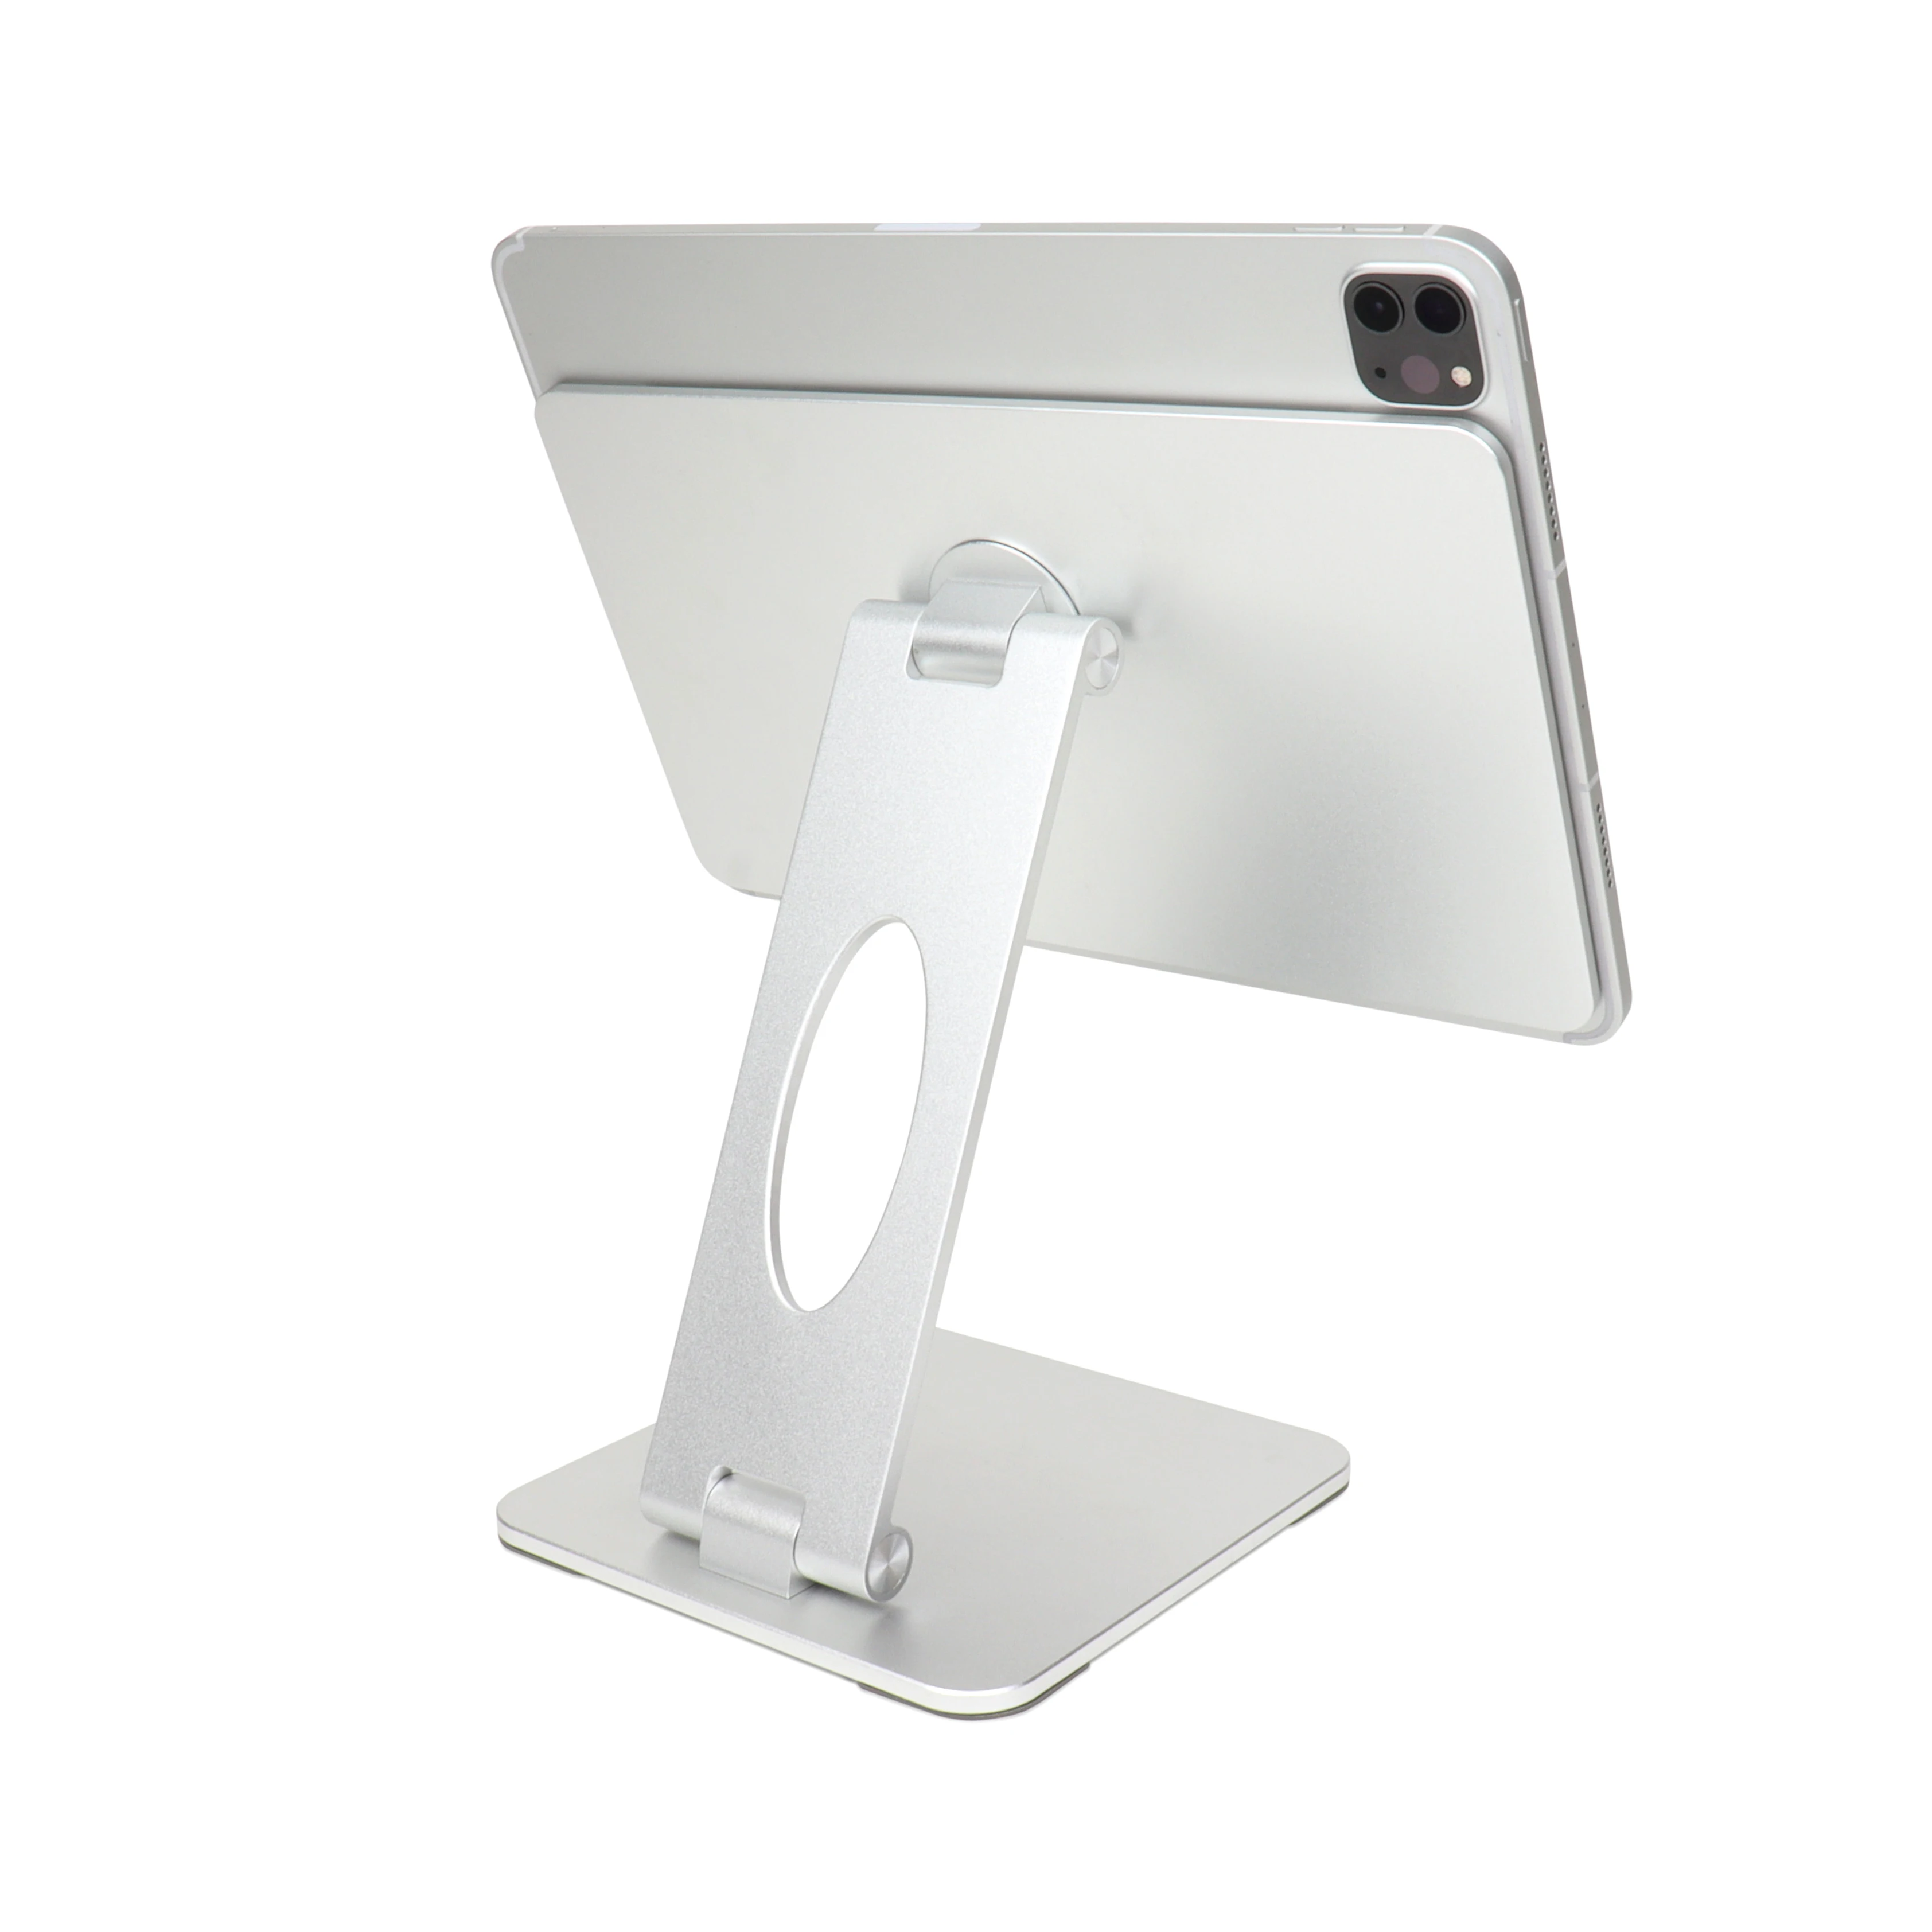 New Style Collapsible Magnet tablet stand holder High quality aluminum alloy for 11inch ipad